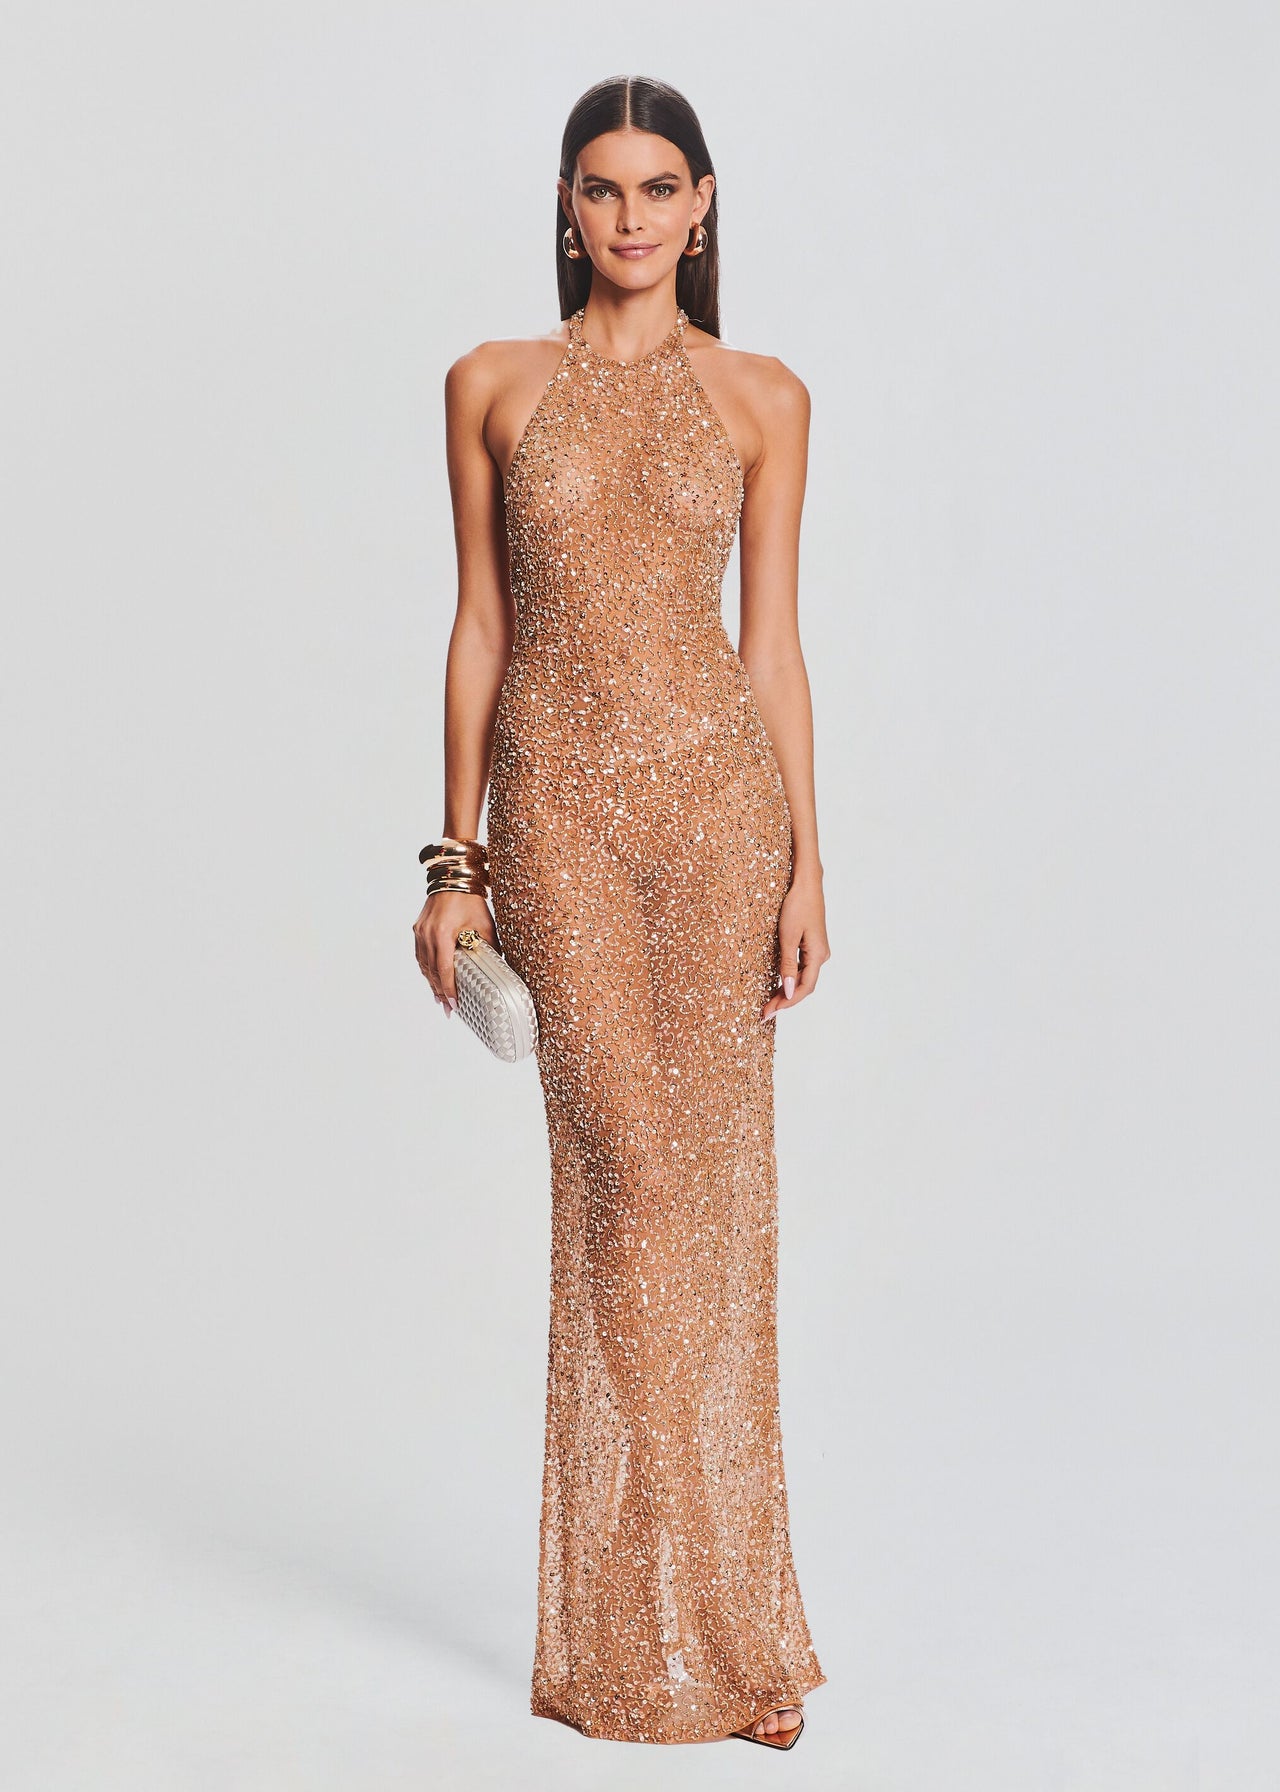 Prettylittlething Dresses | Sequin Dress | Color: Cream/Gold | Size: Xs | Shaniaciearra's Closet